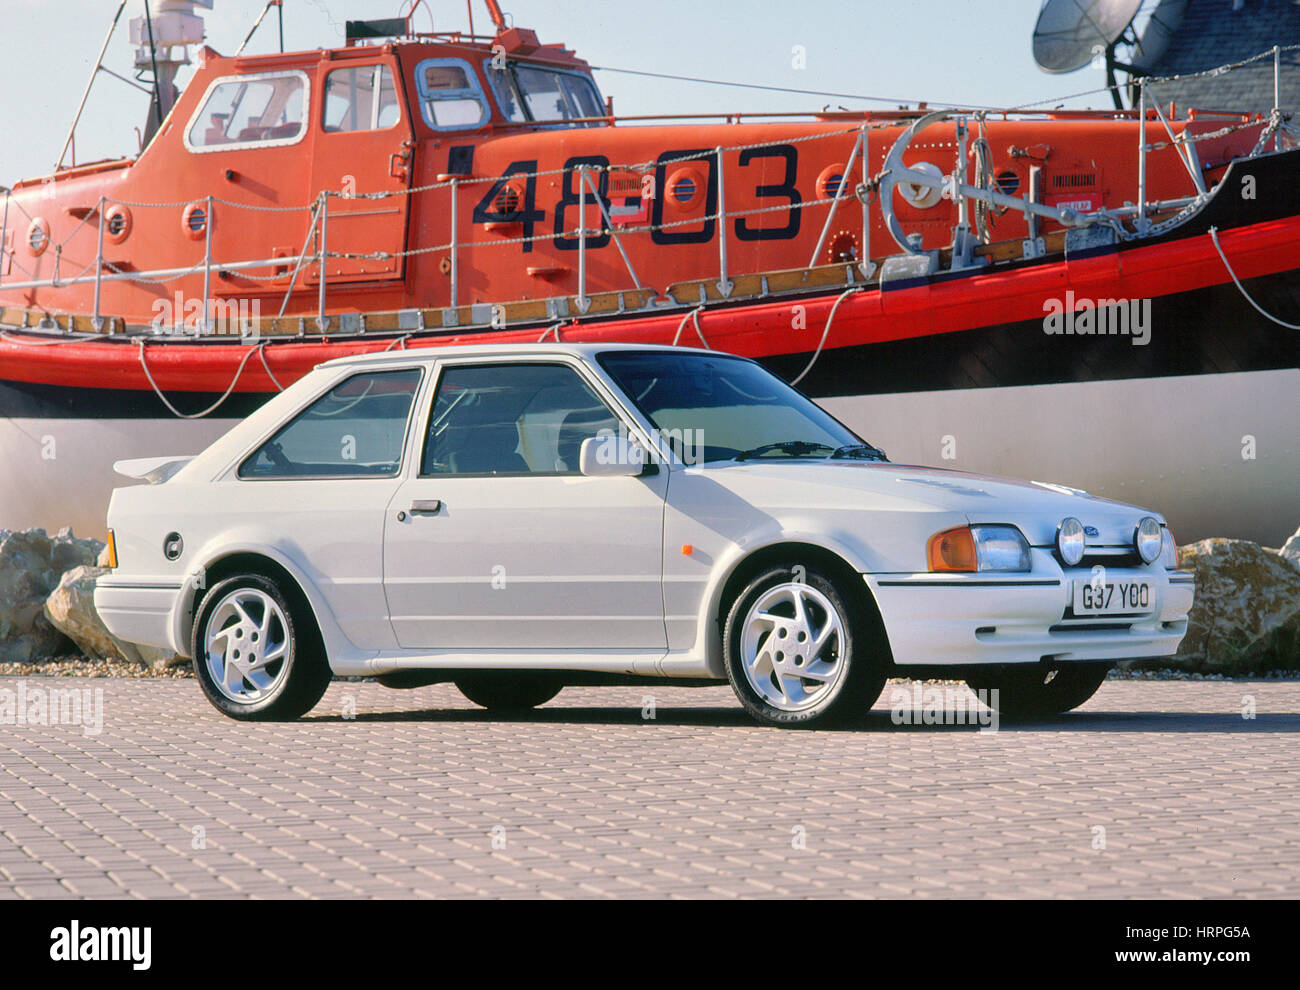 1990 Ford Escort RS Turbo Banque D'Images